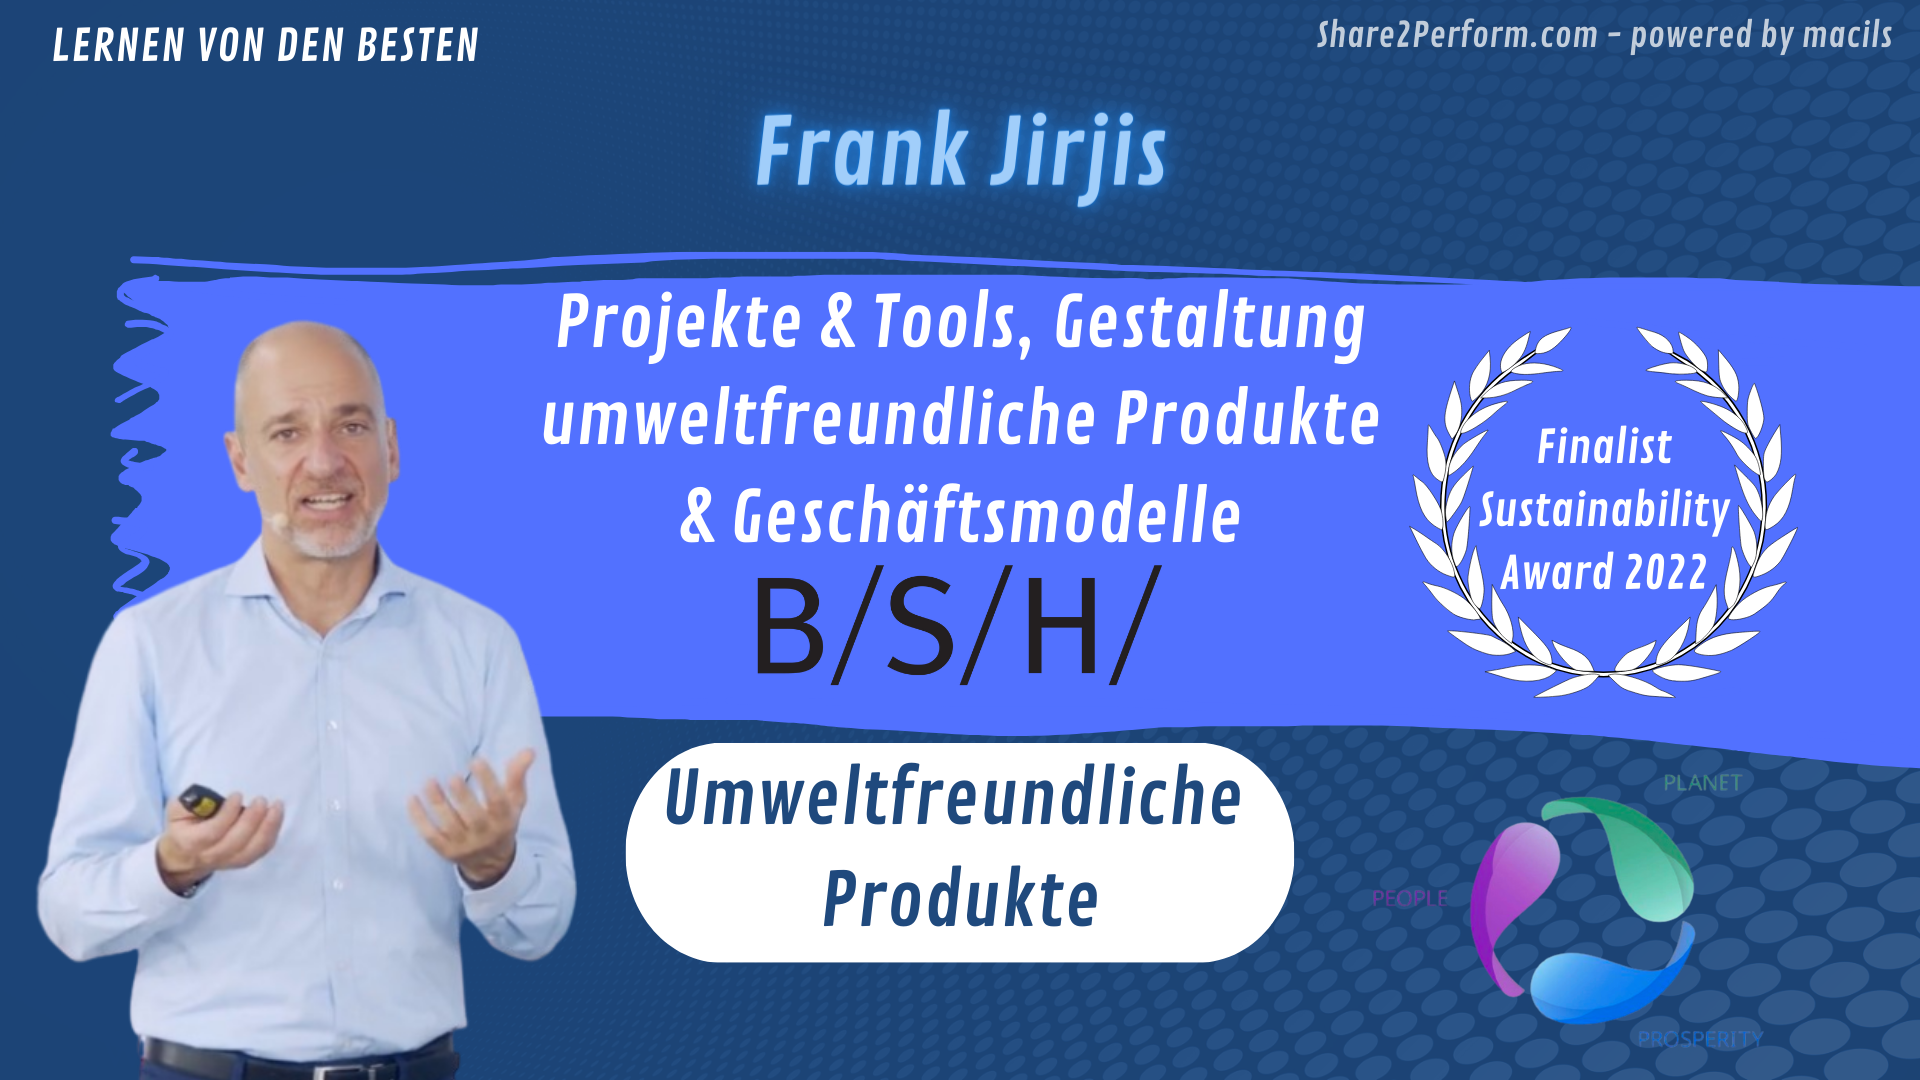 GREEN - Environmentally friendly products with Frank Jirjis